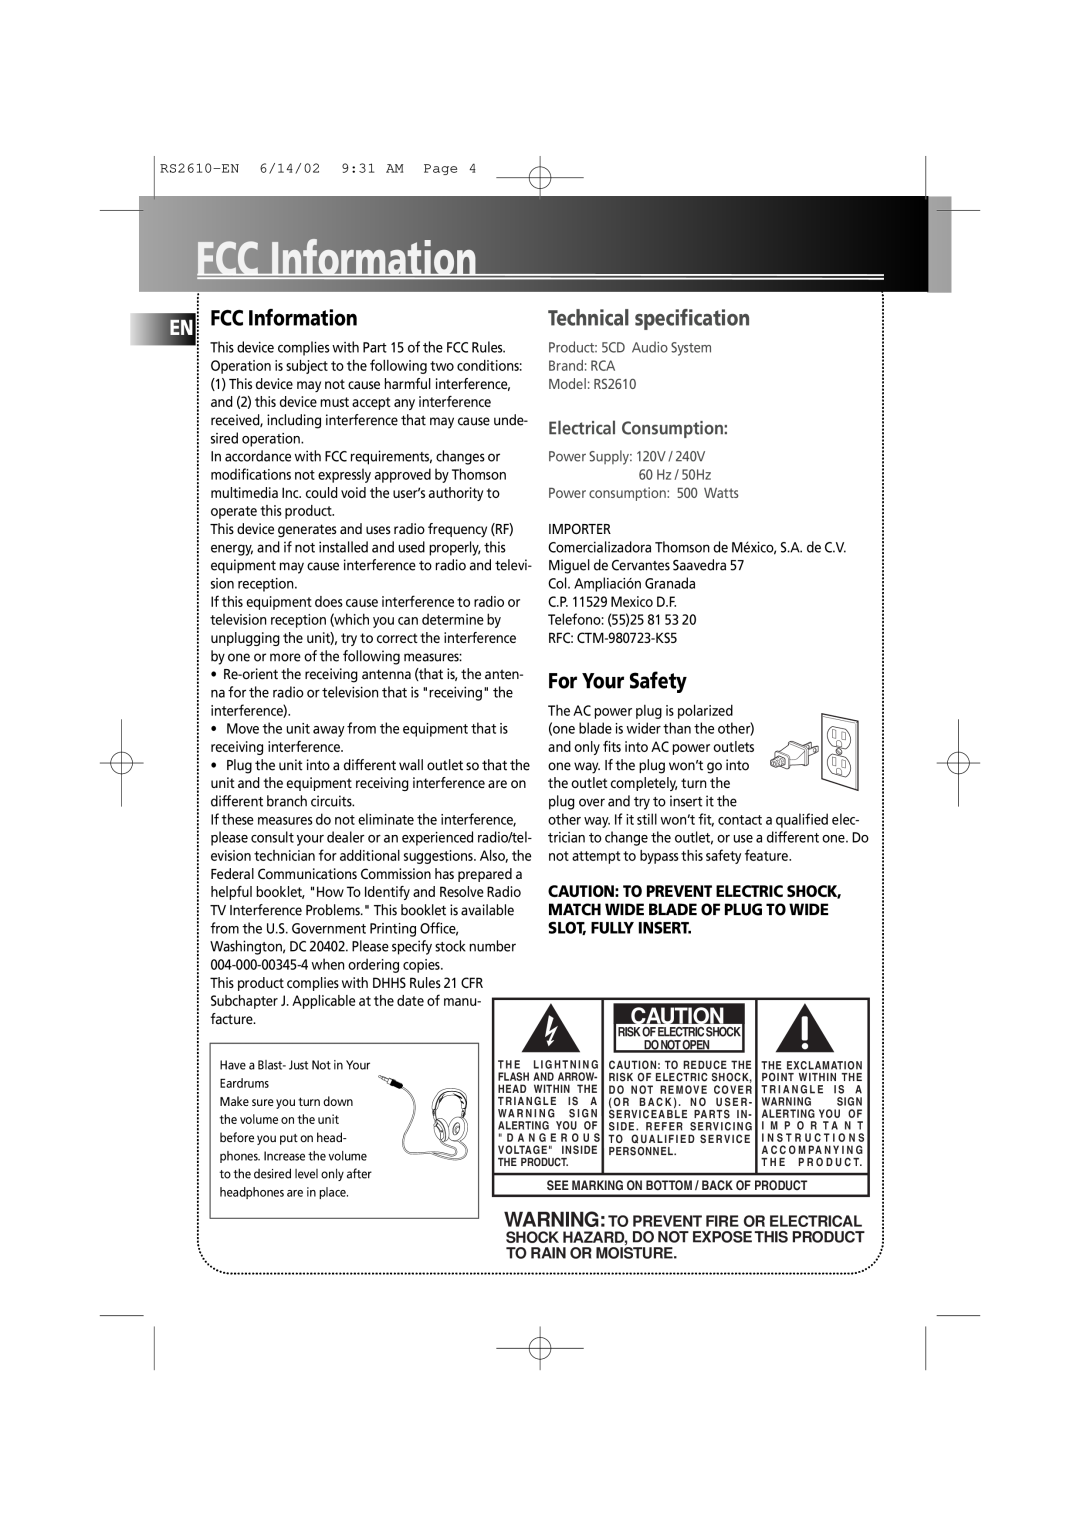 RCA fm radio tuner manual EN FCC Information, For Your Safety, Technical specification, Electrical Consumption 